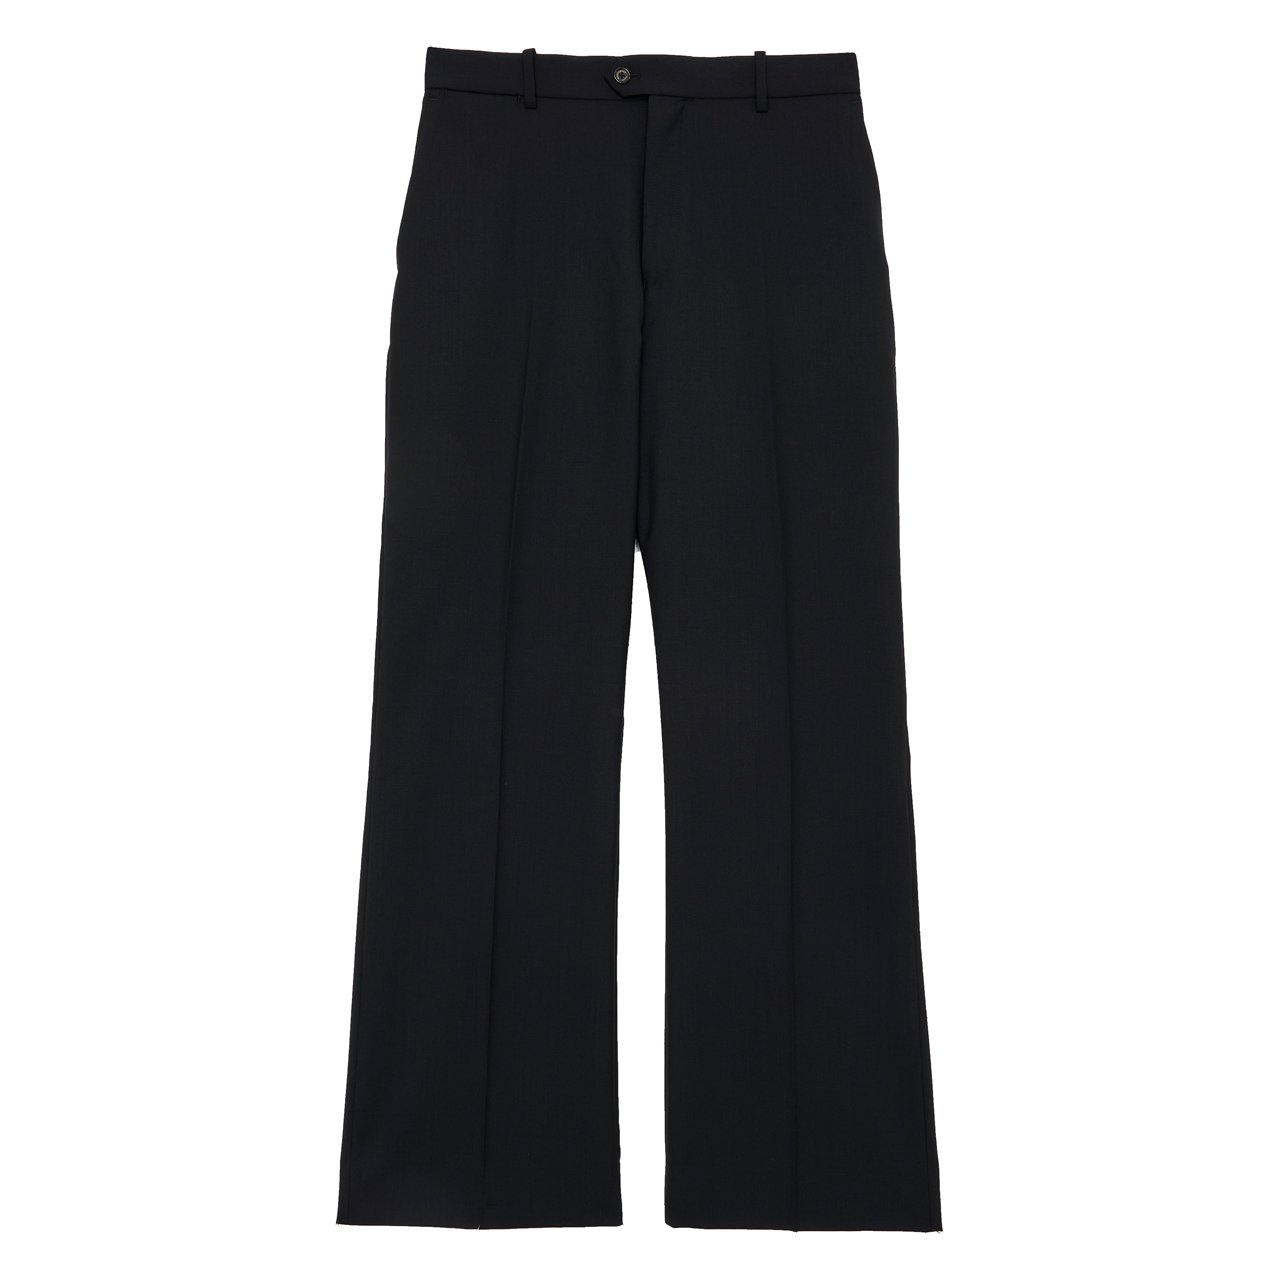 <img class='new_mark_img1' src='https://img.shop-pro.jp/img/new/icons5.gif' style='border:none;display:inline;margin:0px;padding:0px;width:auto;' />MARKAWARE (ޡ)FLAT FRONT FLARE TROUSERS BLACK -ORGANIC WOOL TROPICAL-